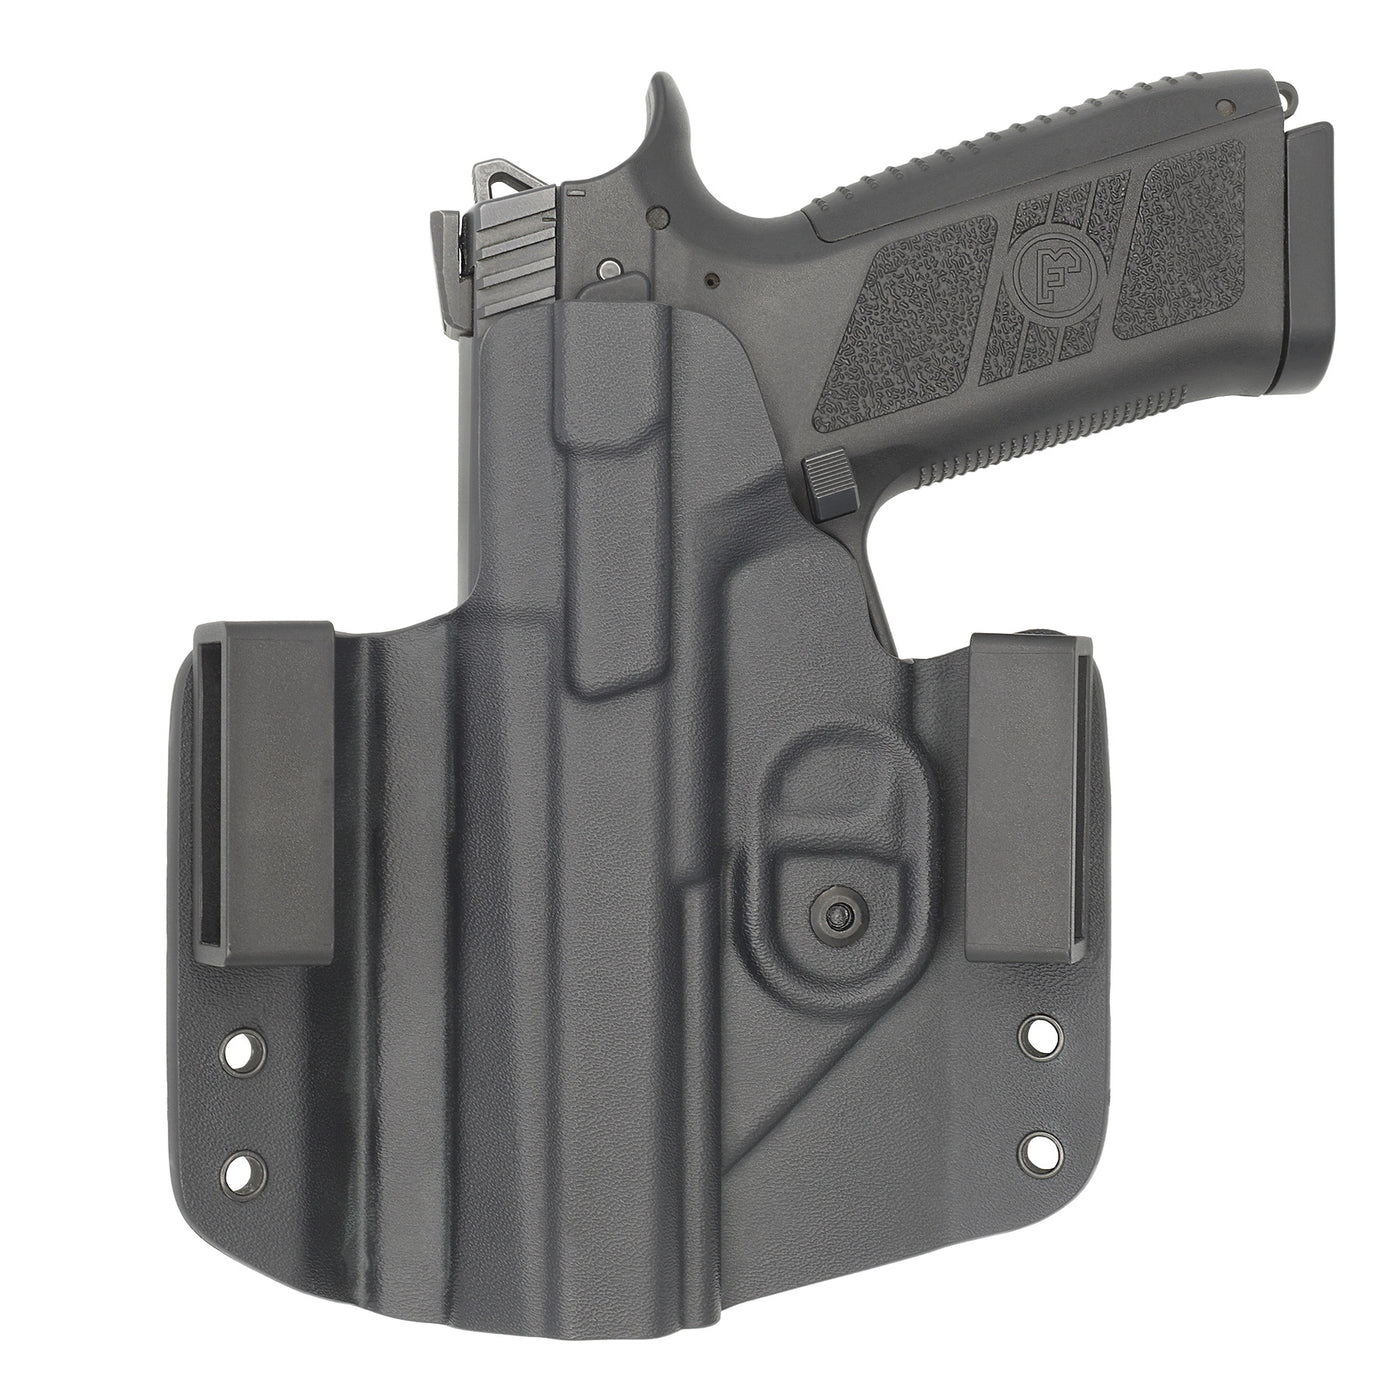 C&G Holsters Custom OWB Covert CZ P09 in holstered position back view